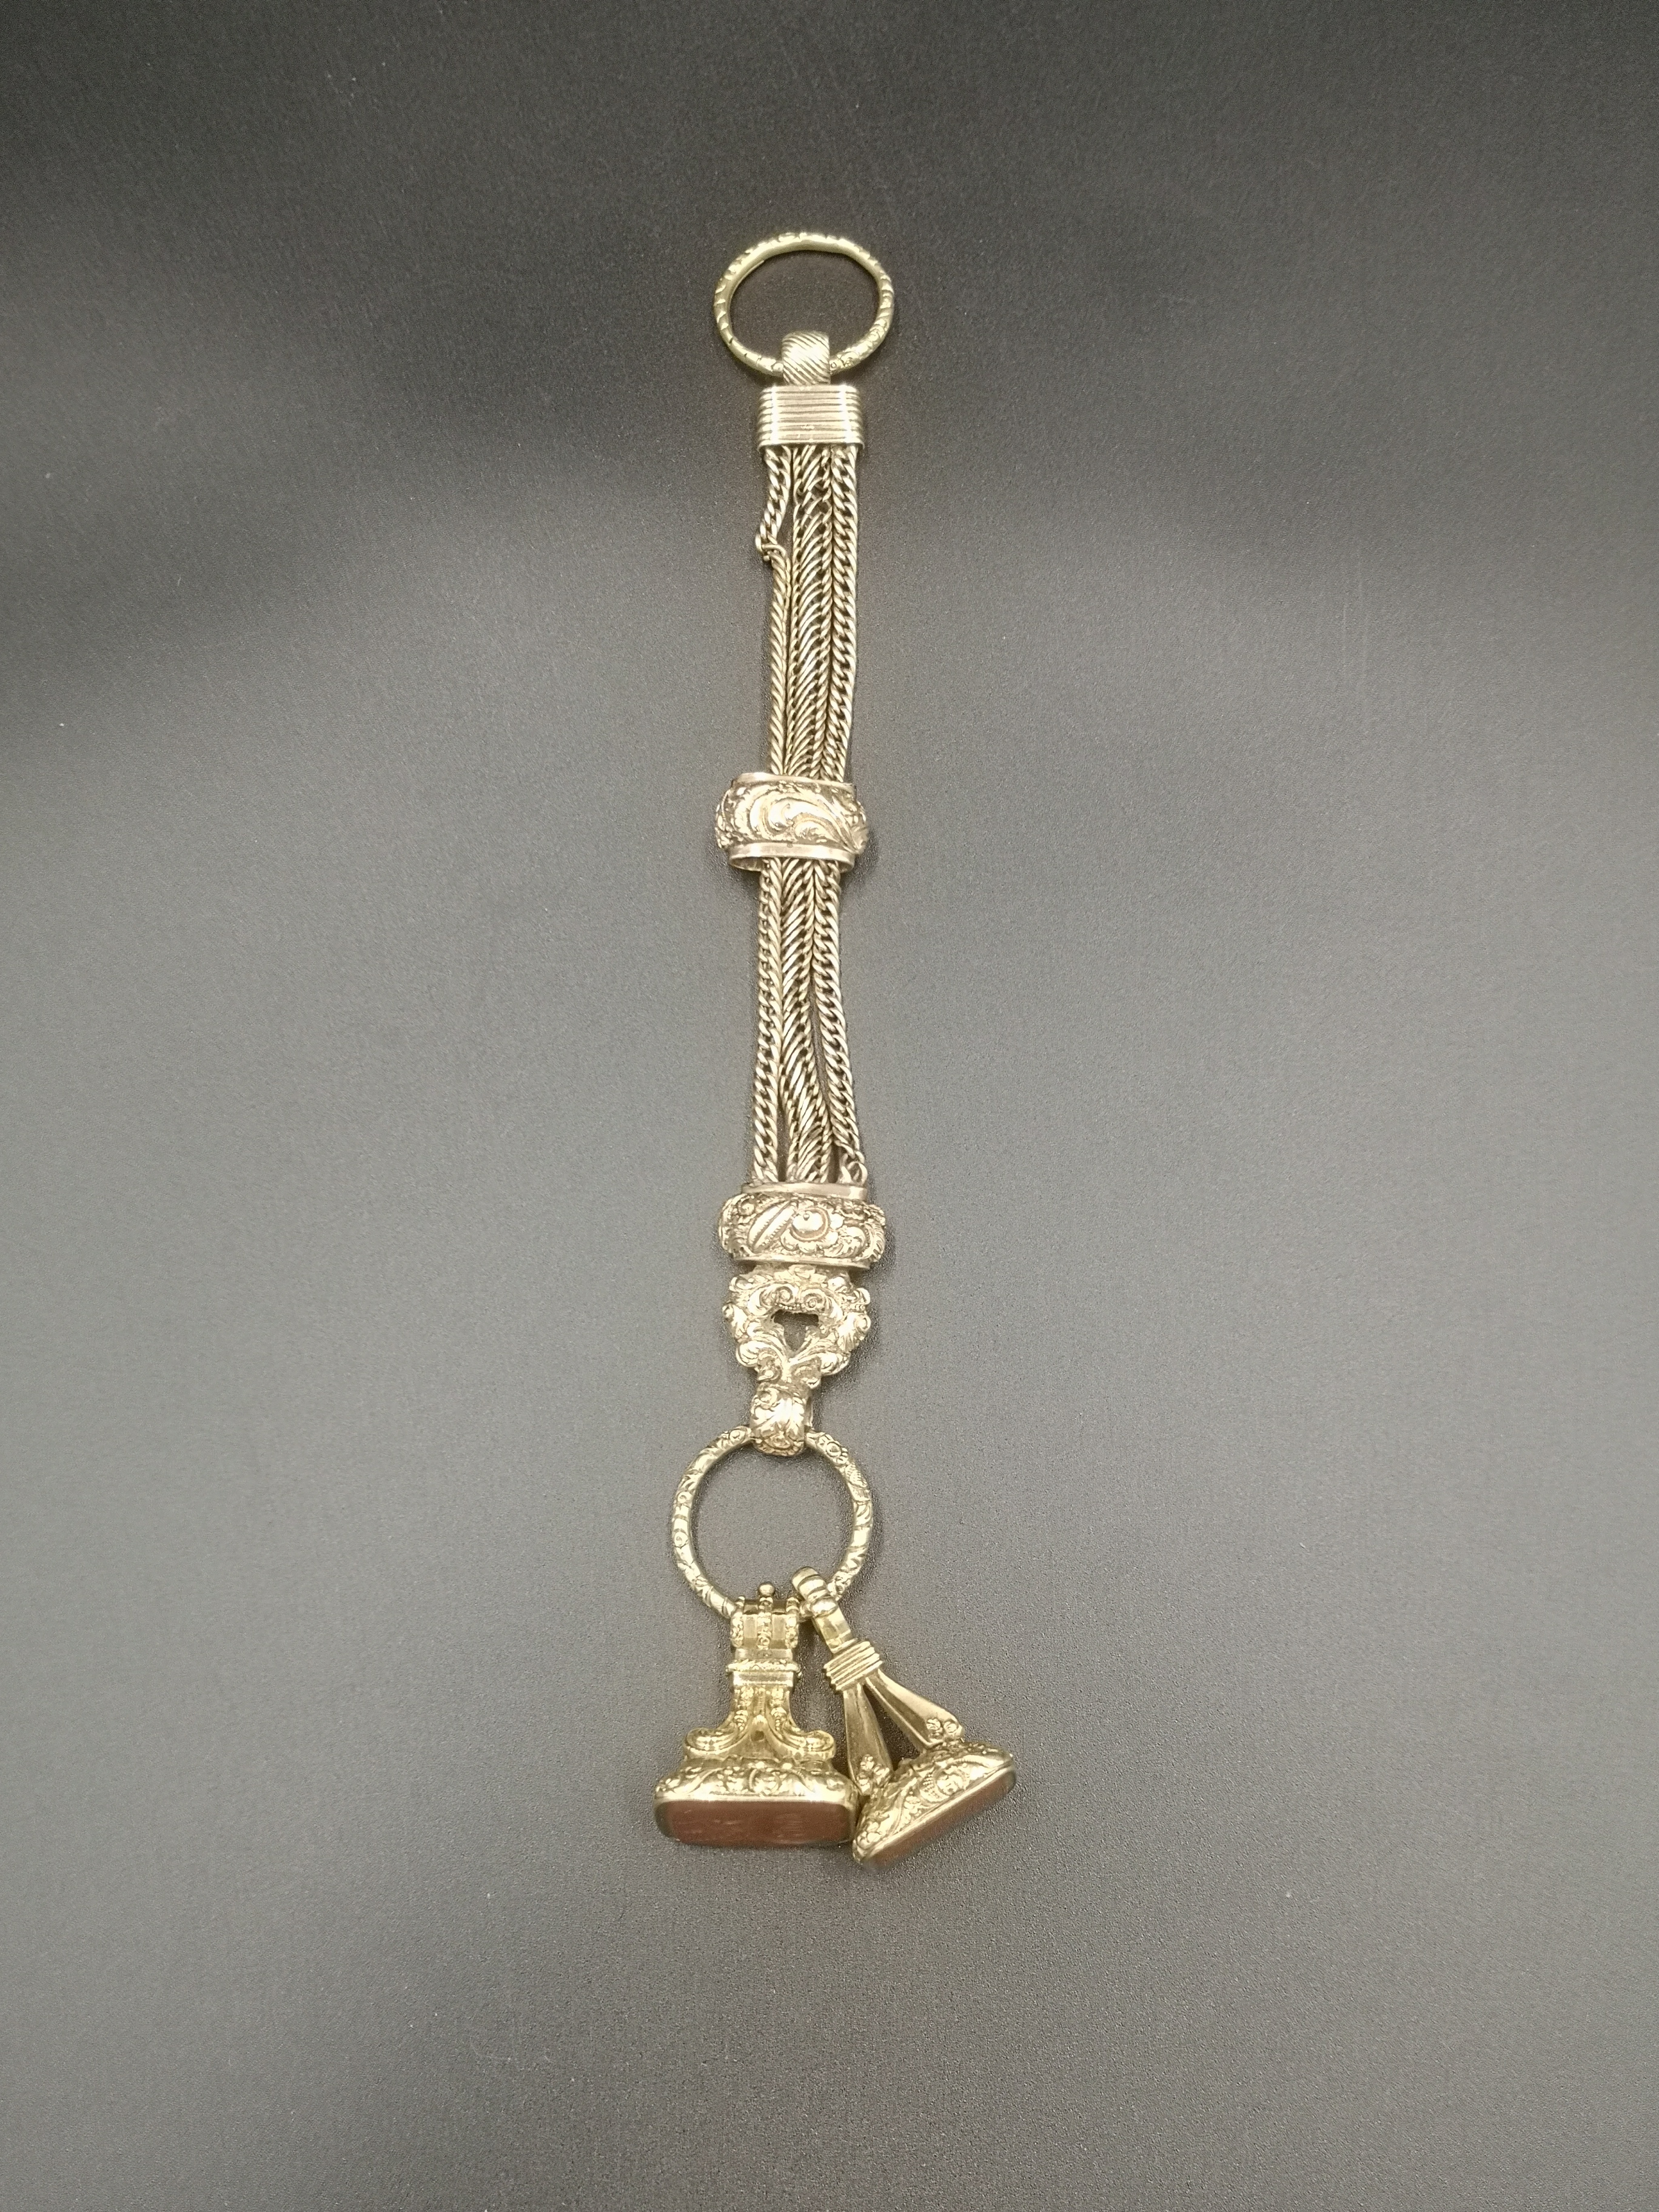 Gold fob chain with two seals - Image 8 of 8